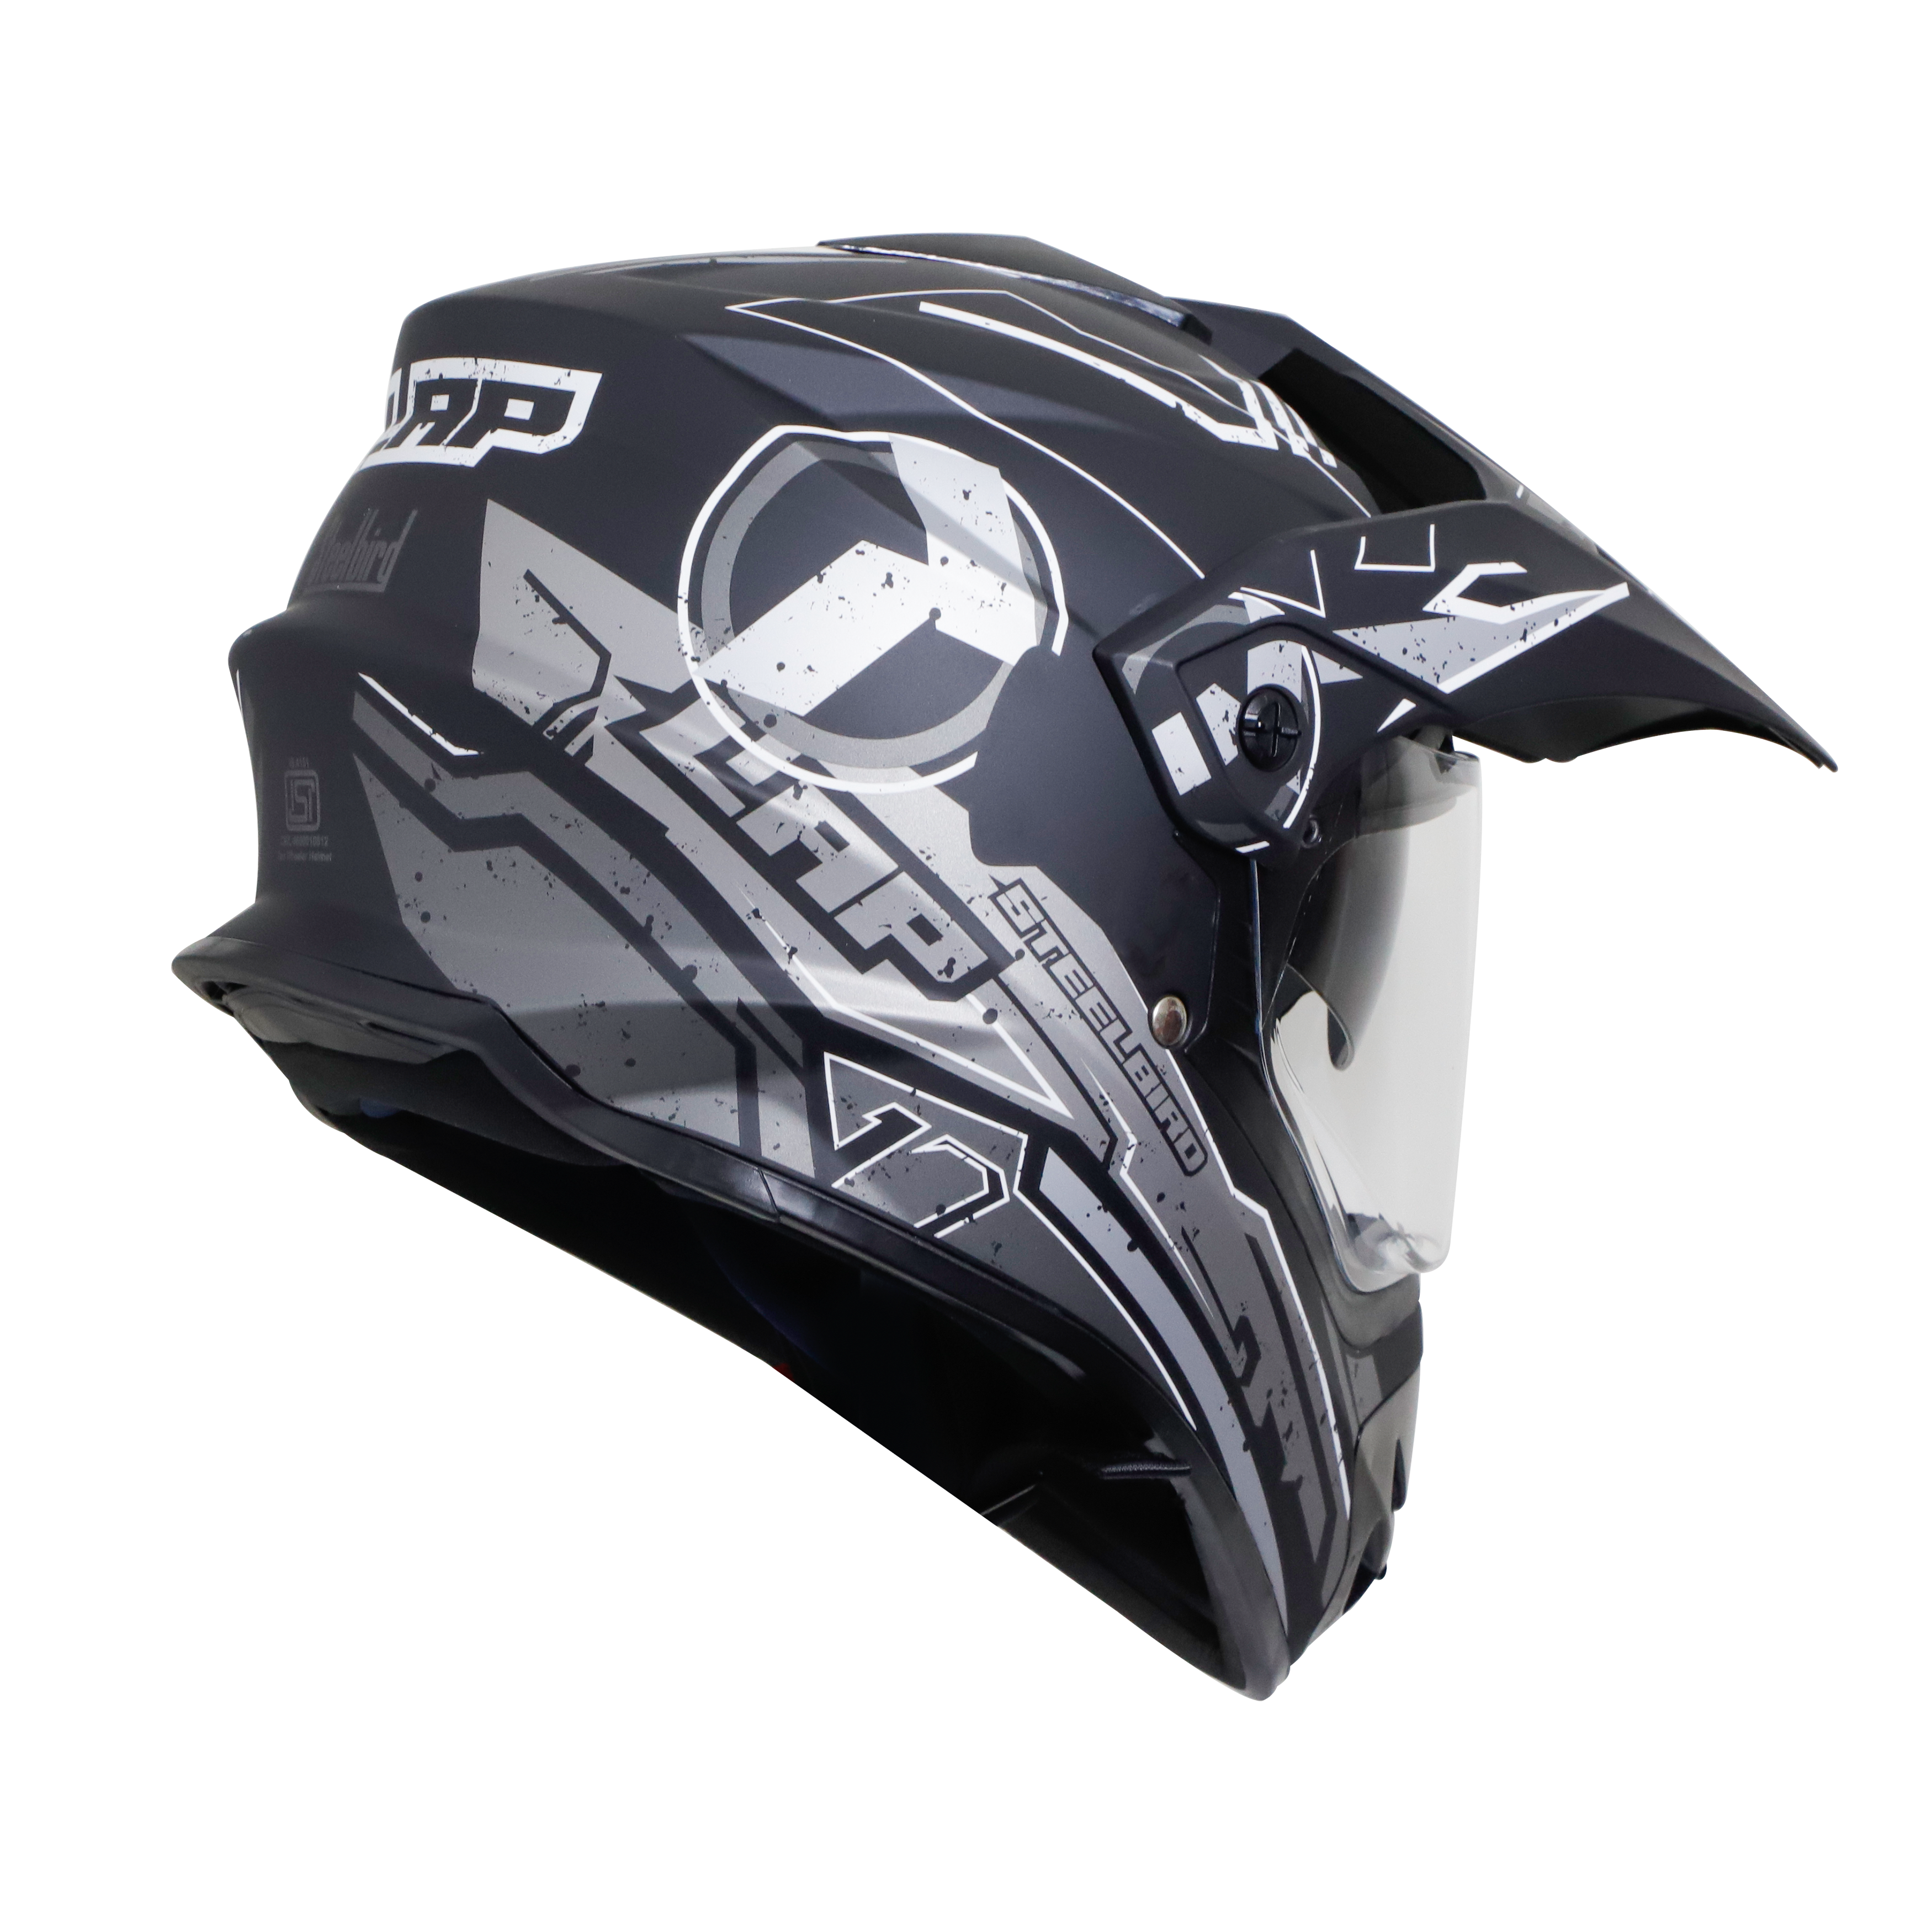 SB-42 BANG LAP MAT BLACK WITH GREY (WITH CHROME SILVER INNER SUN SHIELD)